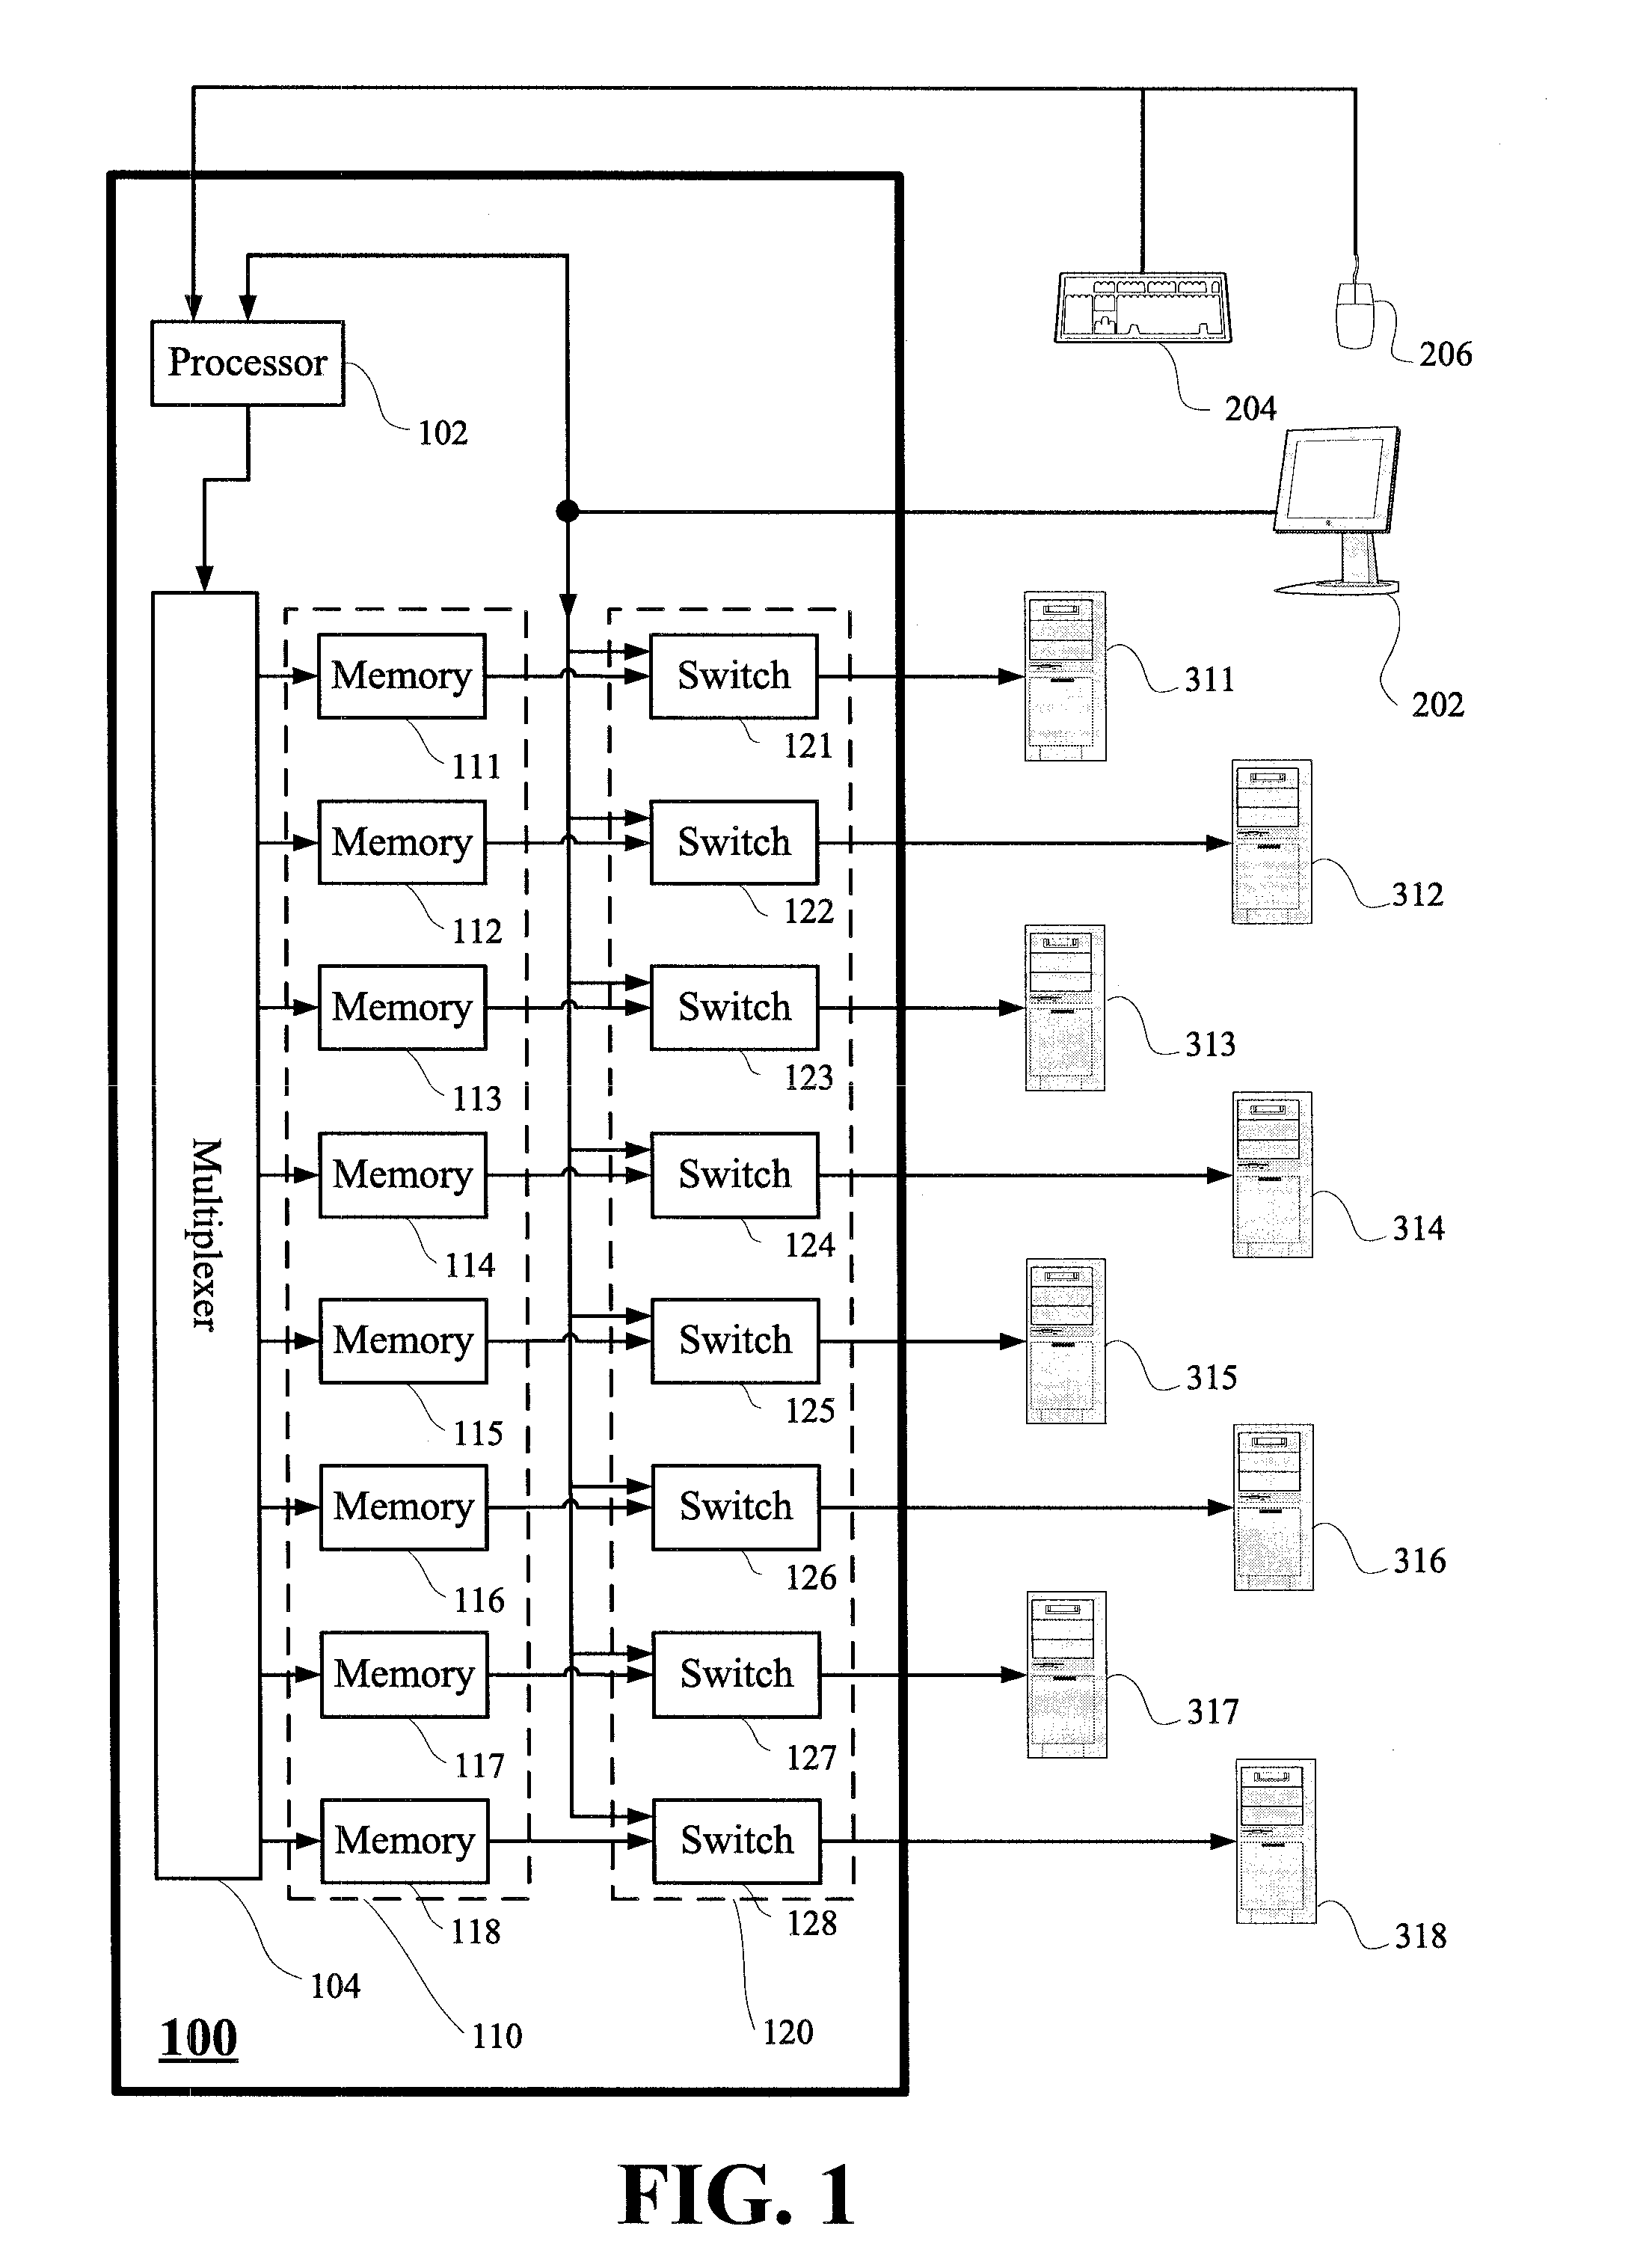 KVM switch capable of providing edid of display for computer coupled thereto and method thereof